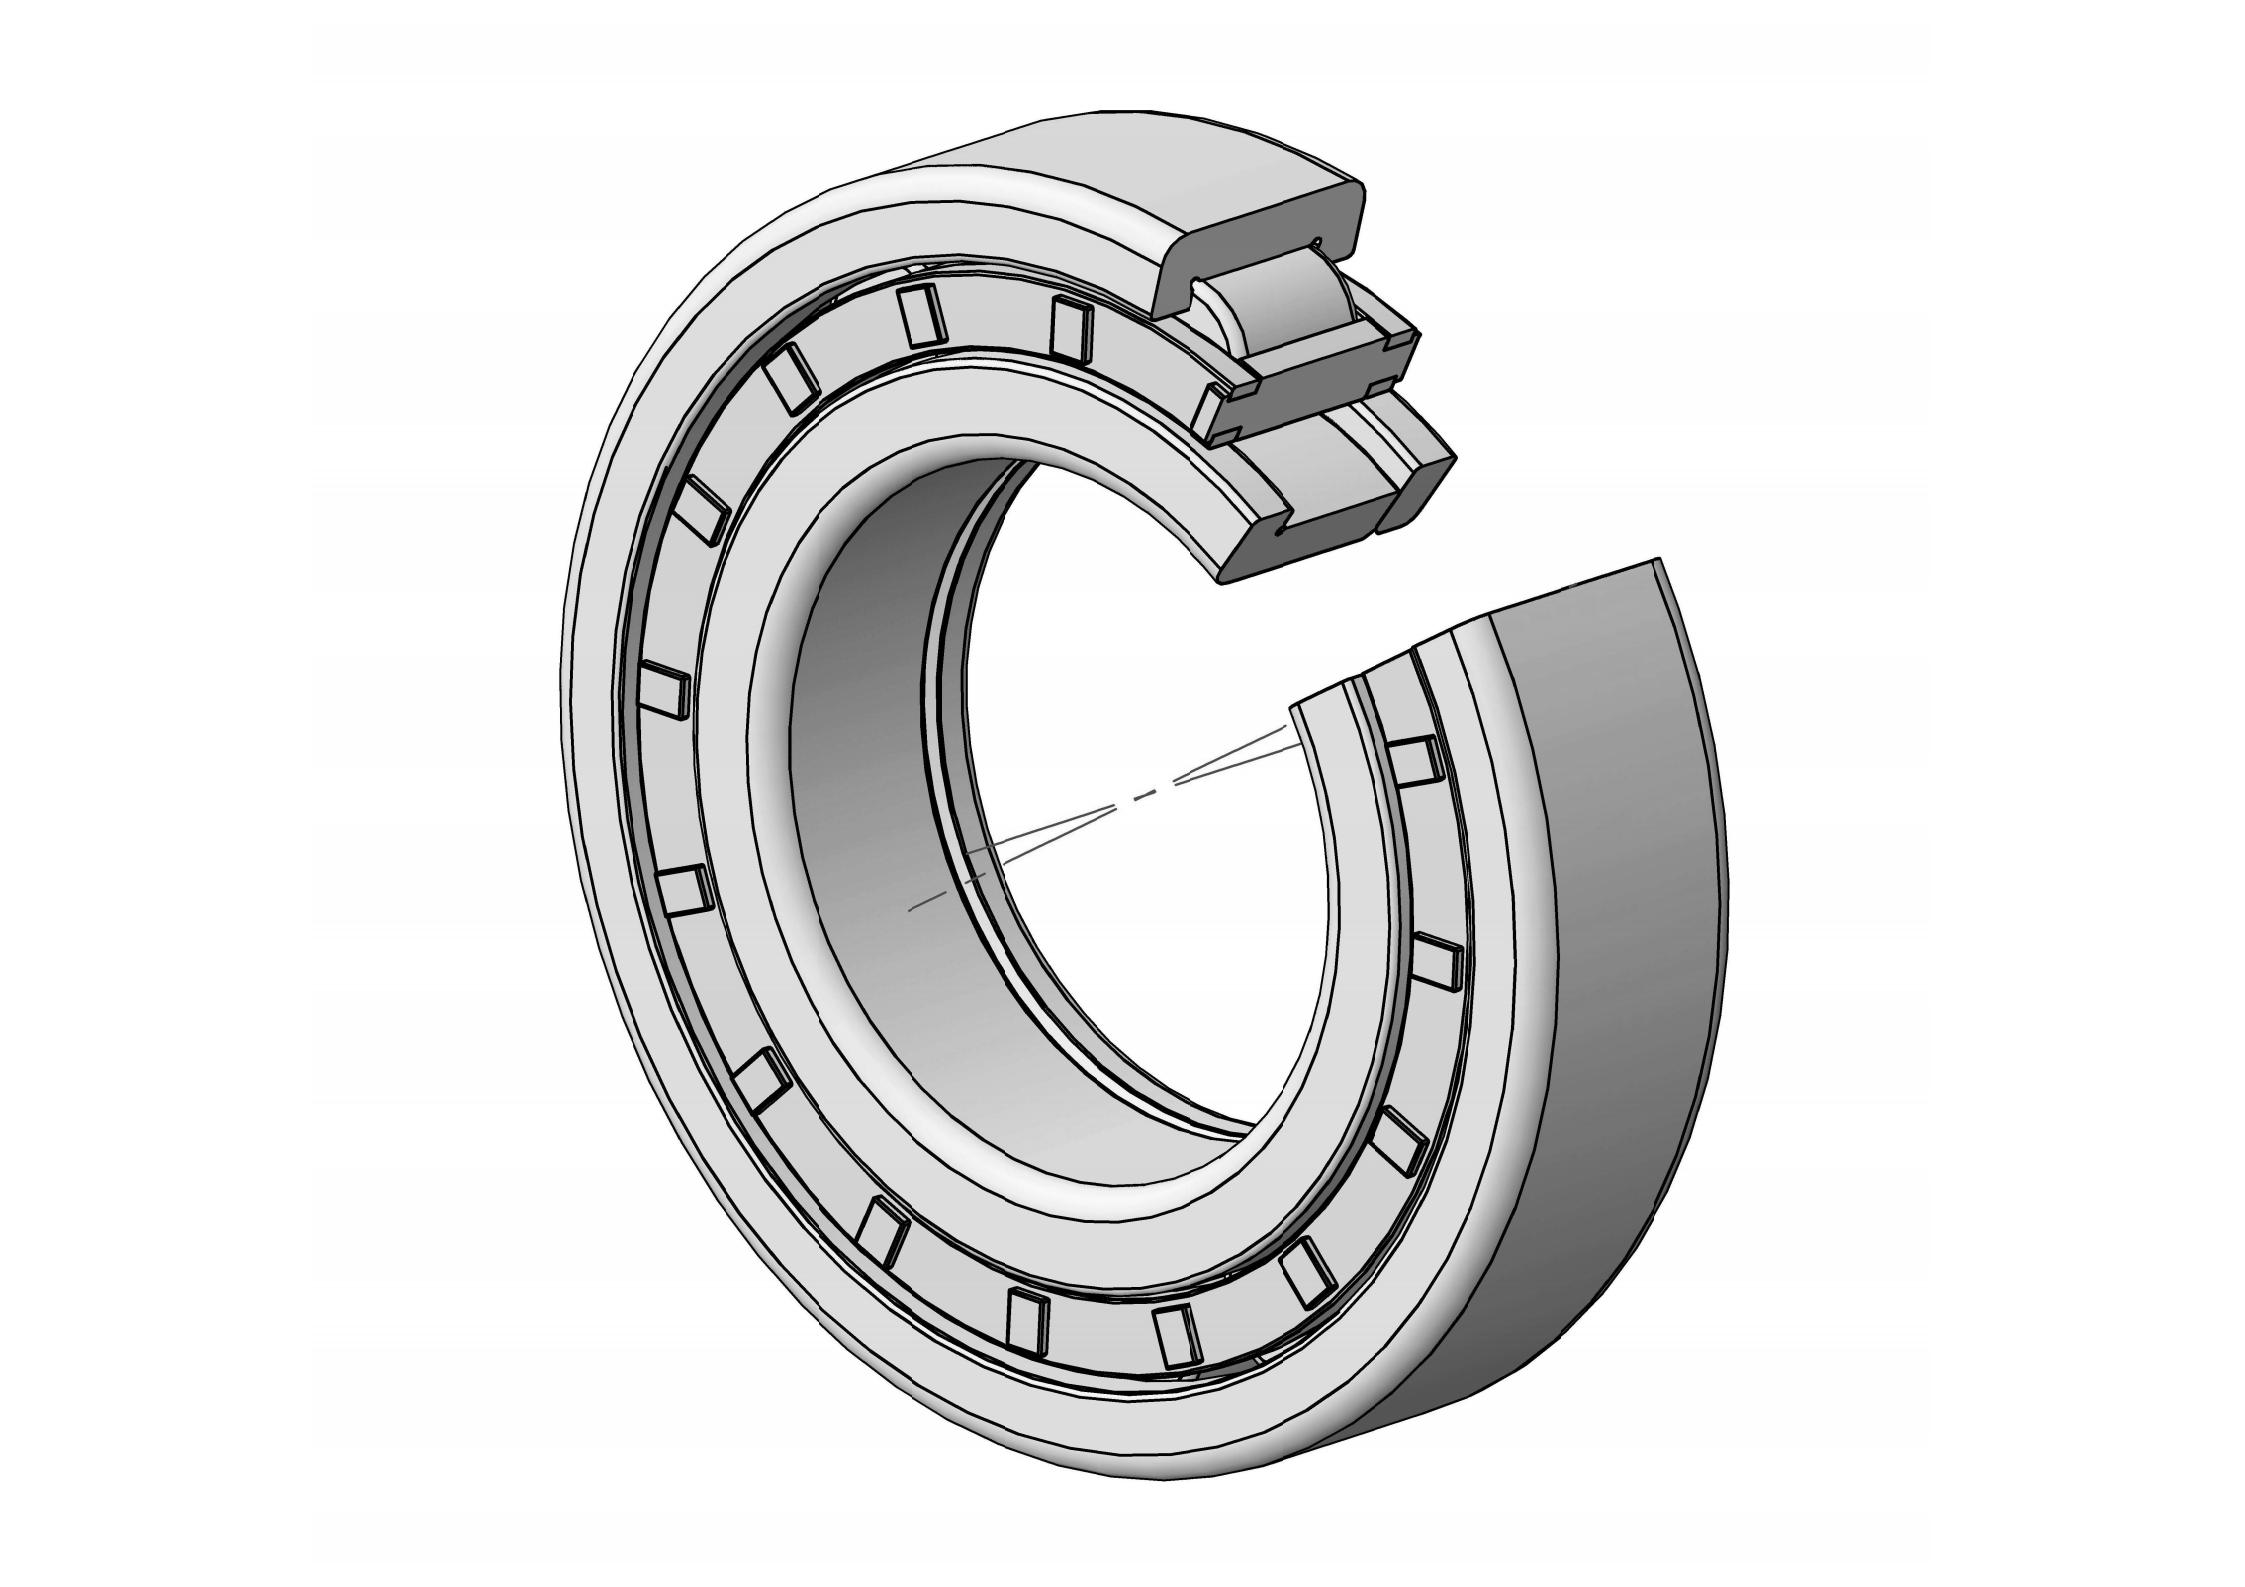 NUP214-E Single Row Cylindrical roller bearing 